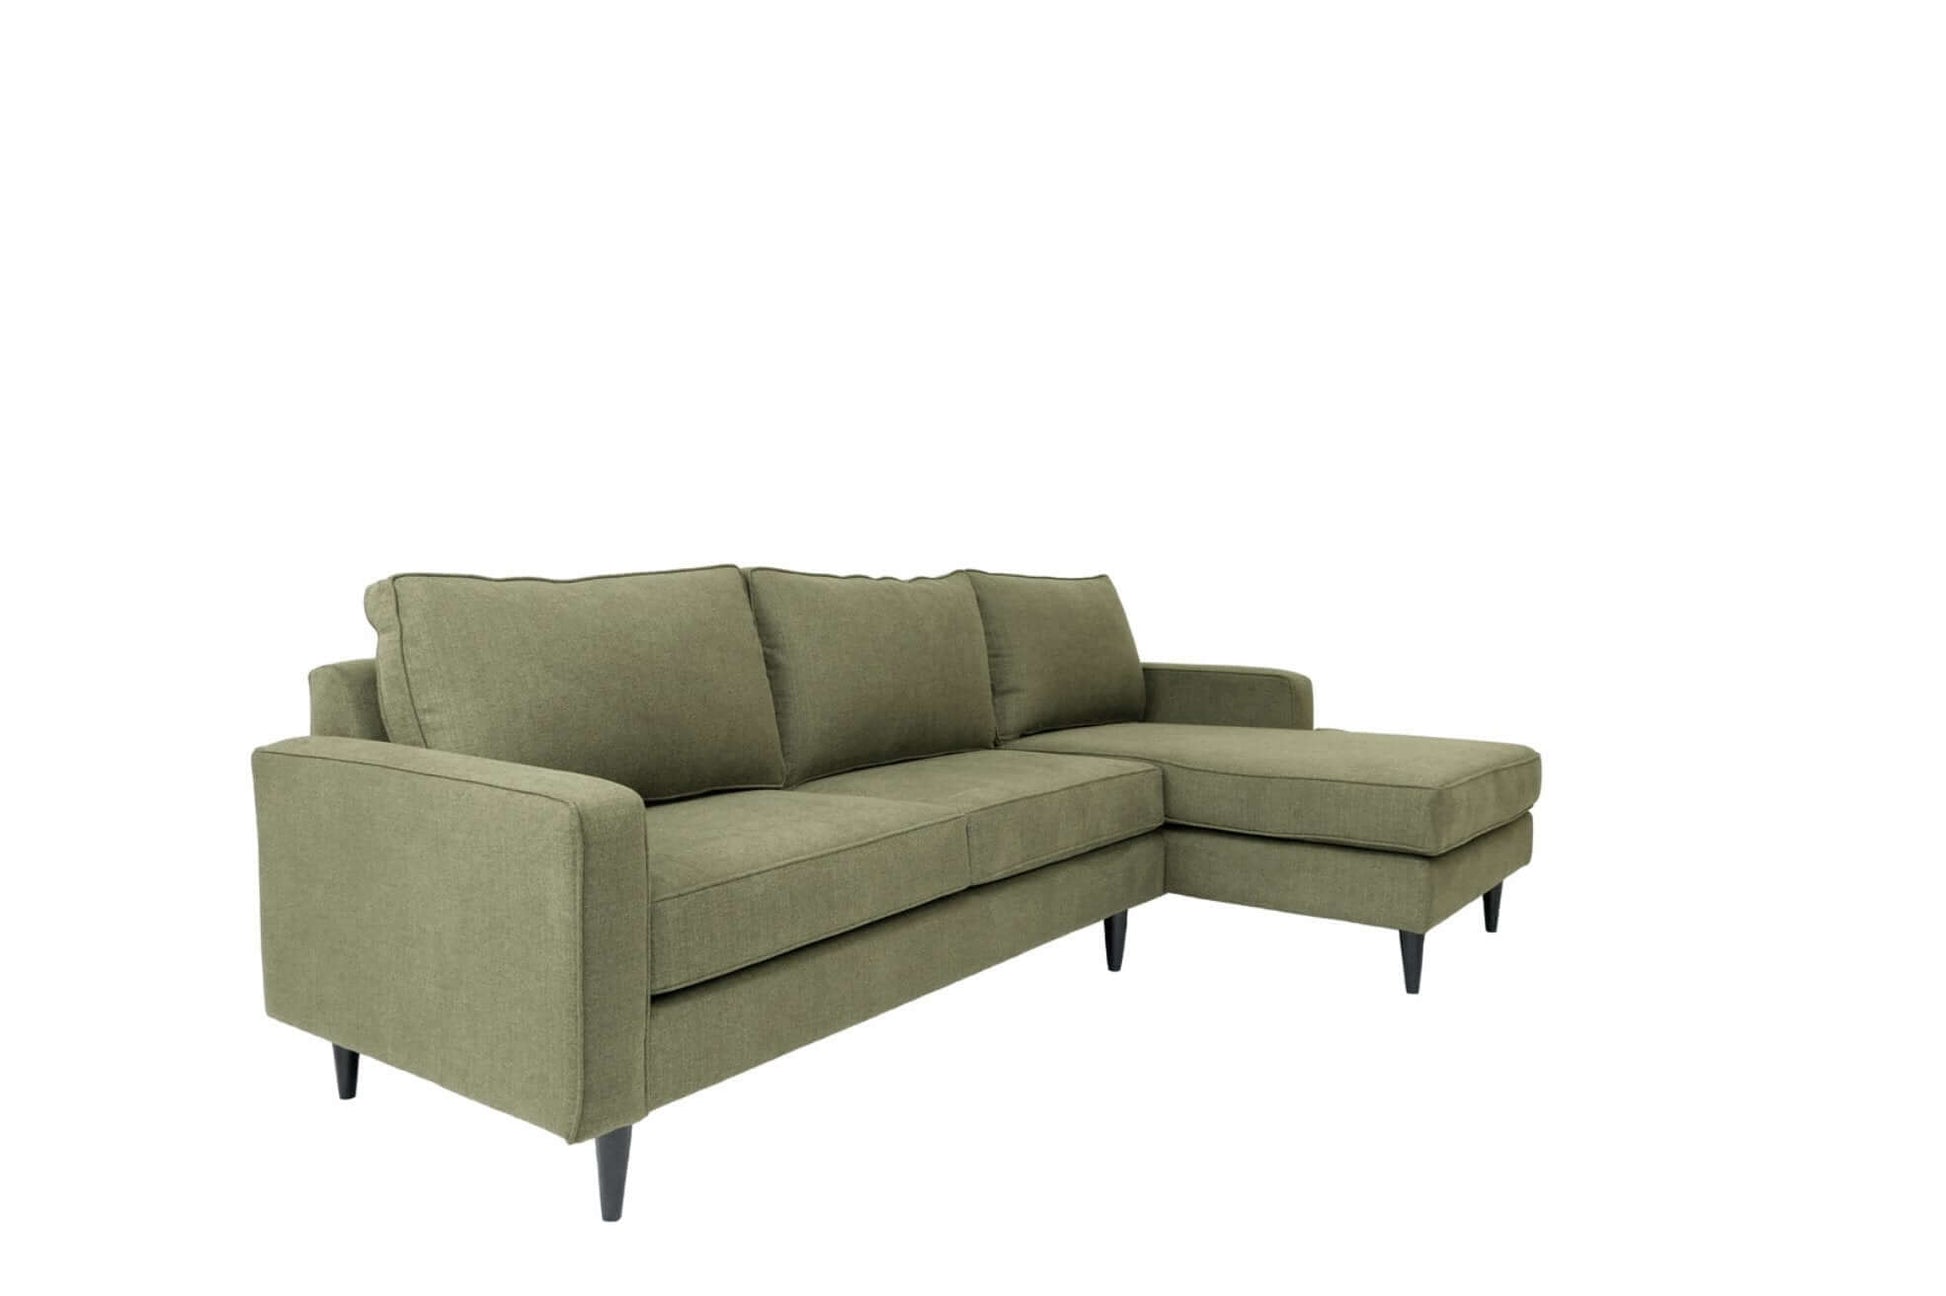 MCM Styled Polyester L Shape Right Facing Chaise Sectional Sofa, Blue or Green 108" - Revel Sofa 